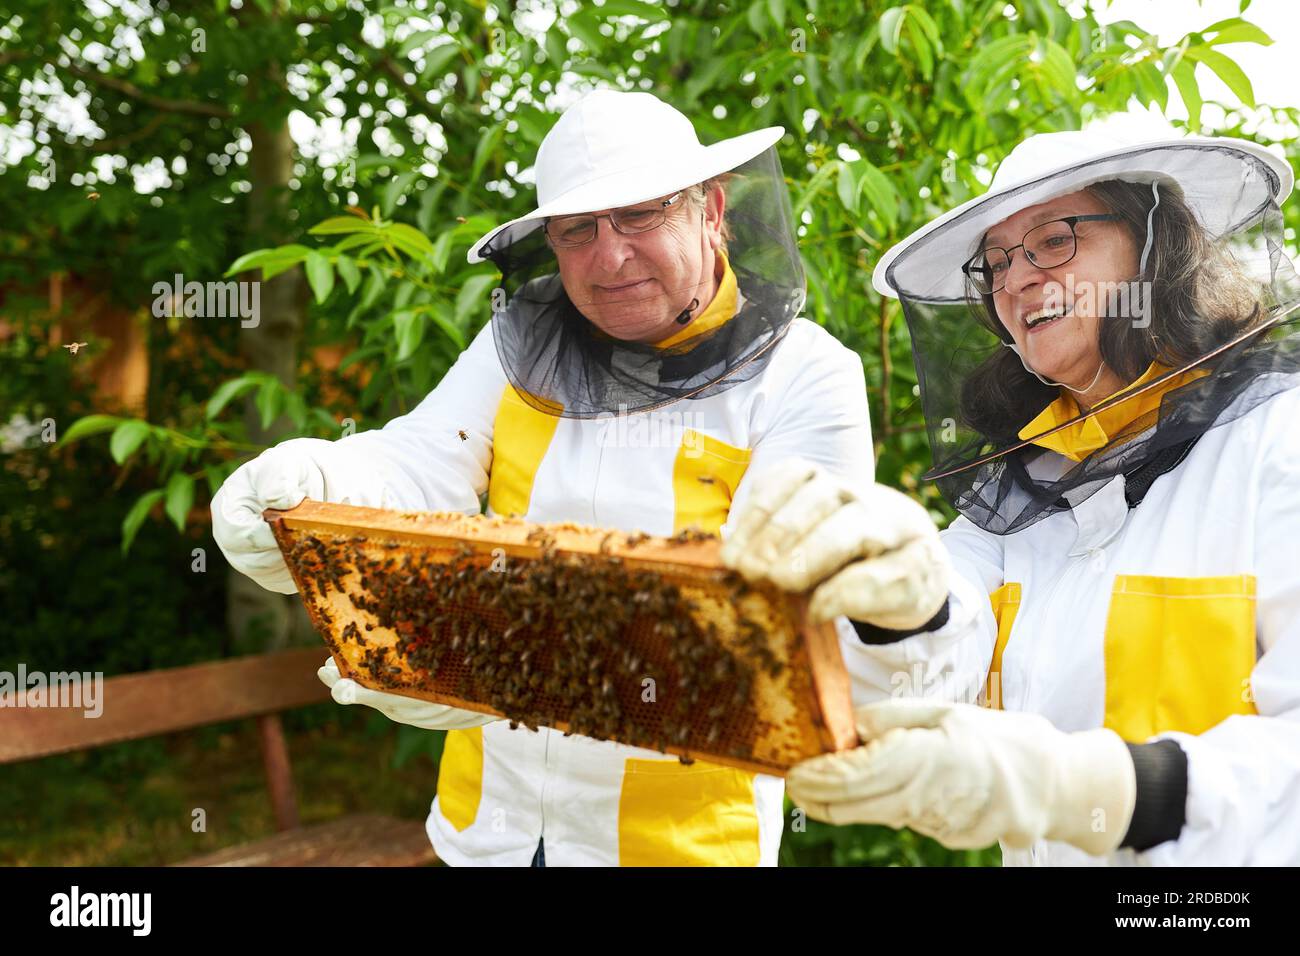 Smiling senior female and male apiarist analyzing honeycomb frame at apiary garden Stock Photo